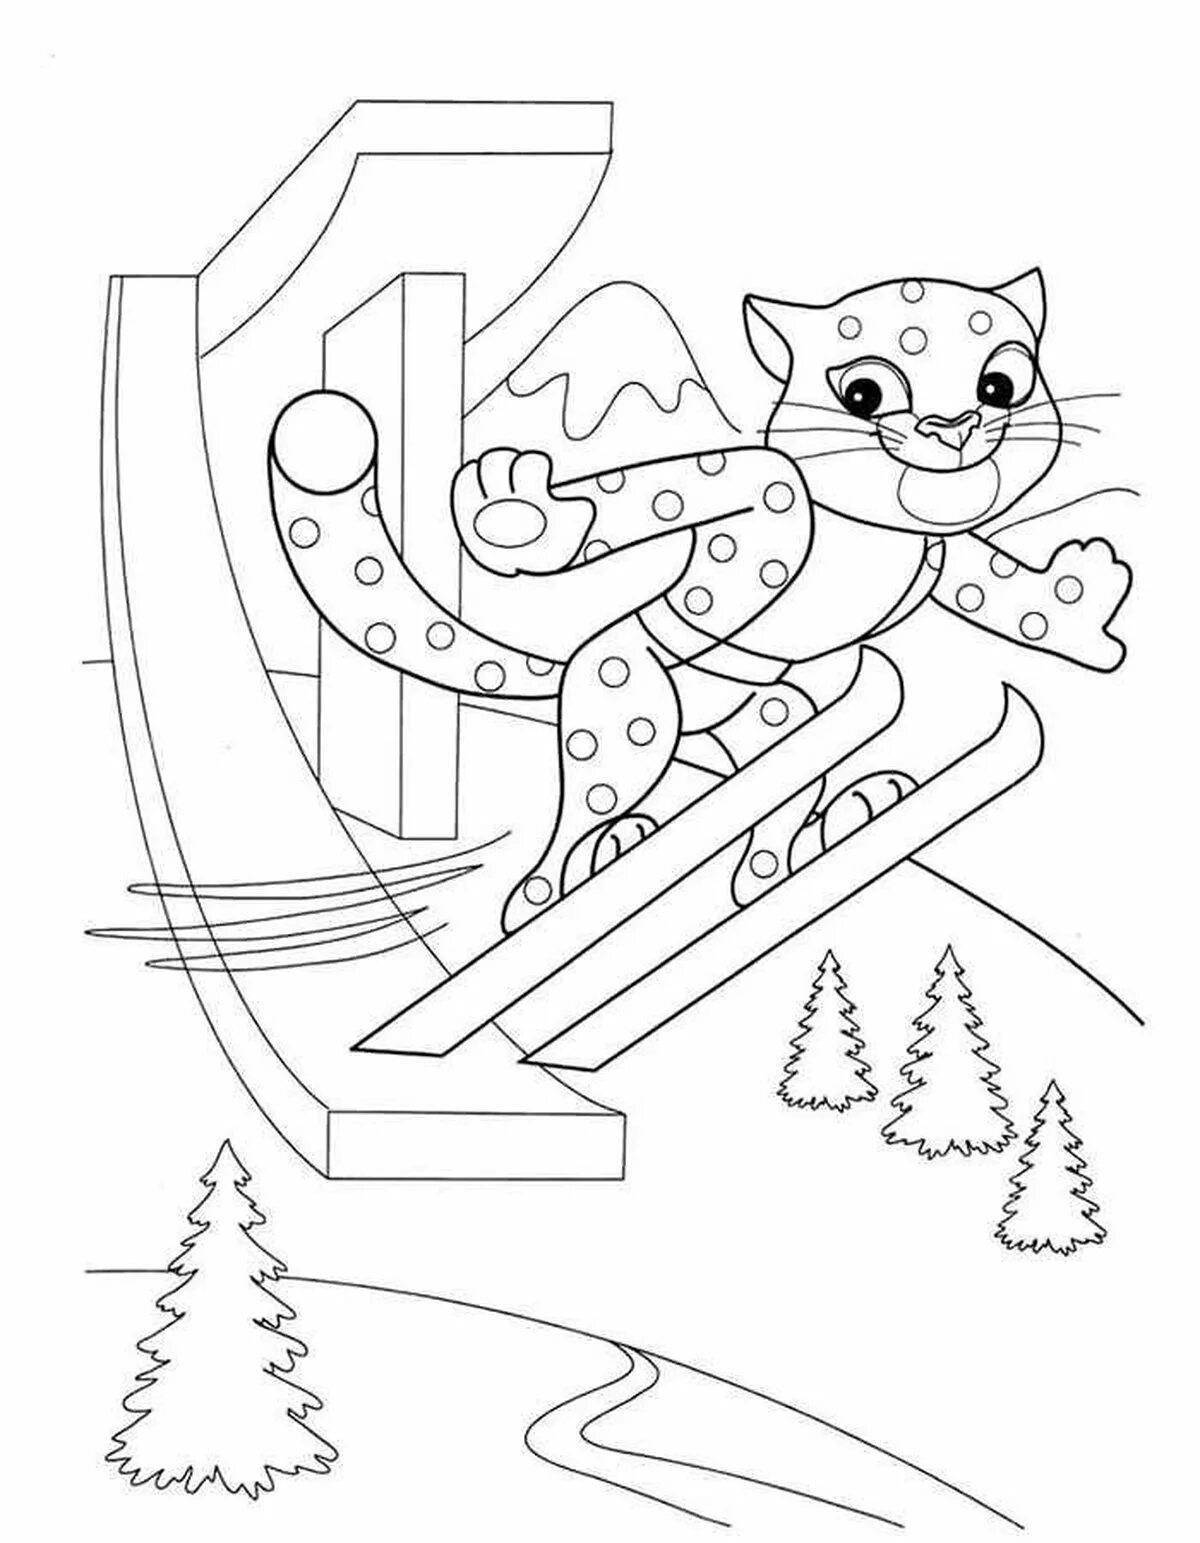 Colorful winter sports coloring book for preschoolers